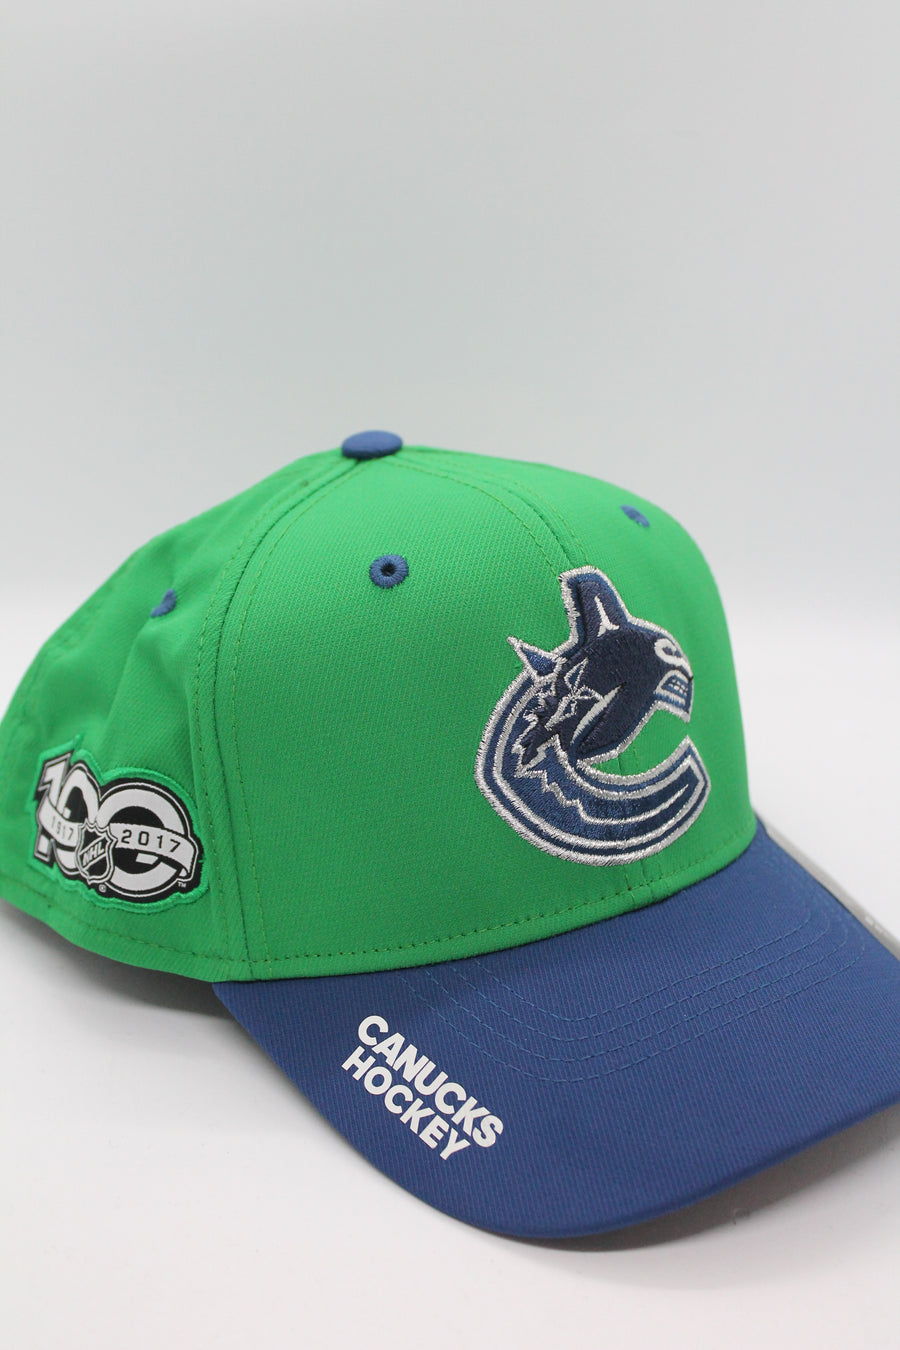 NHL Vancouver Canucks Adidas Structured Flex Training Hat